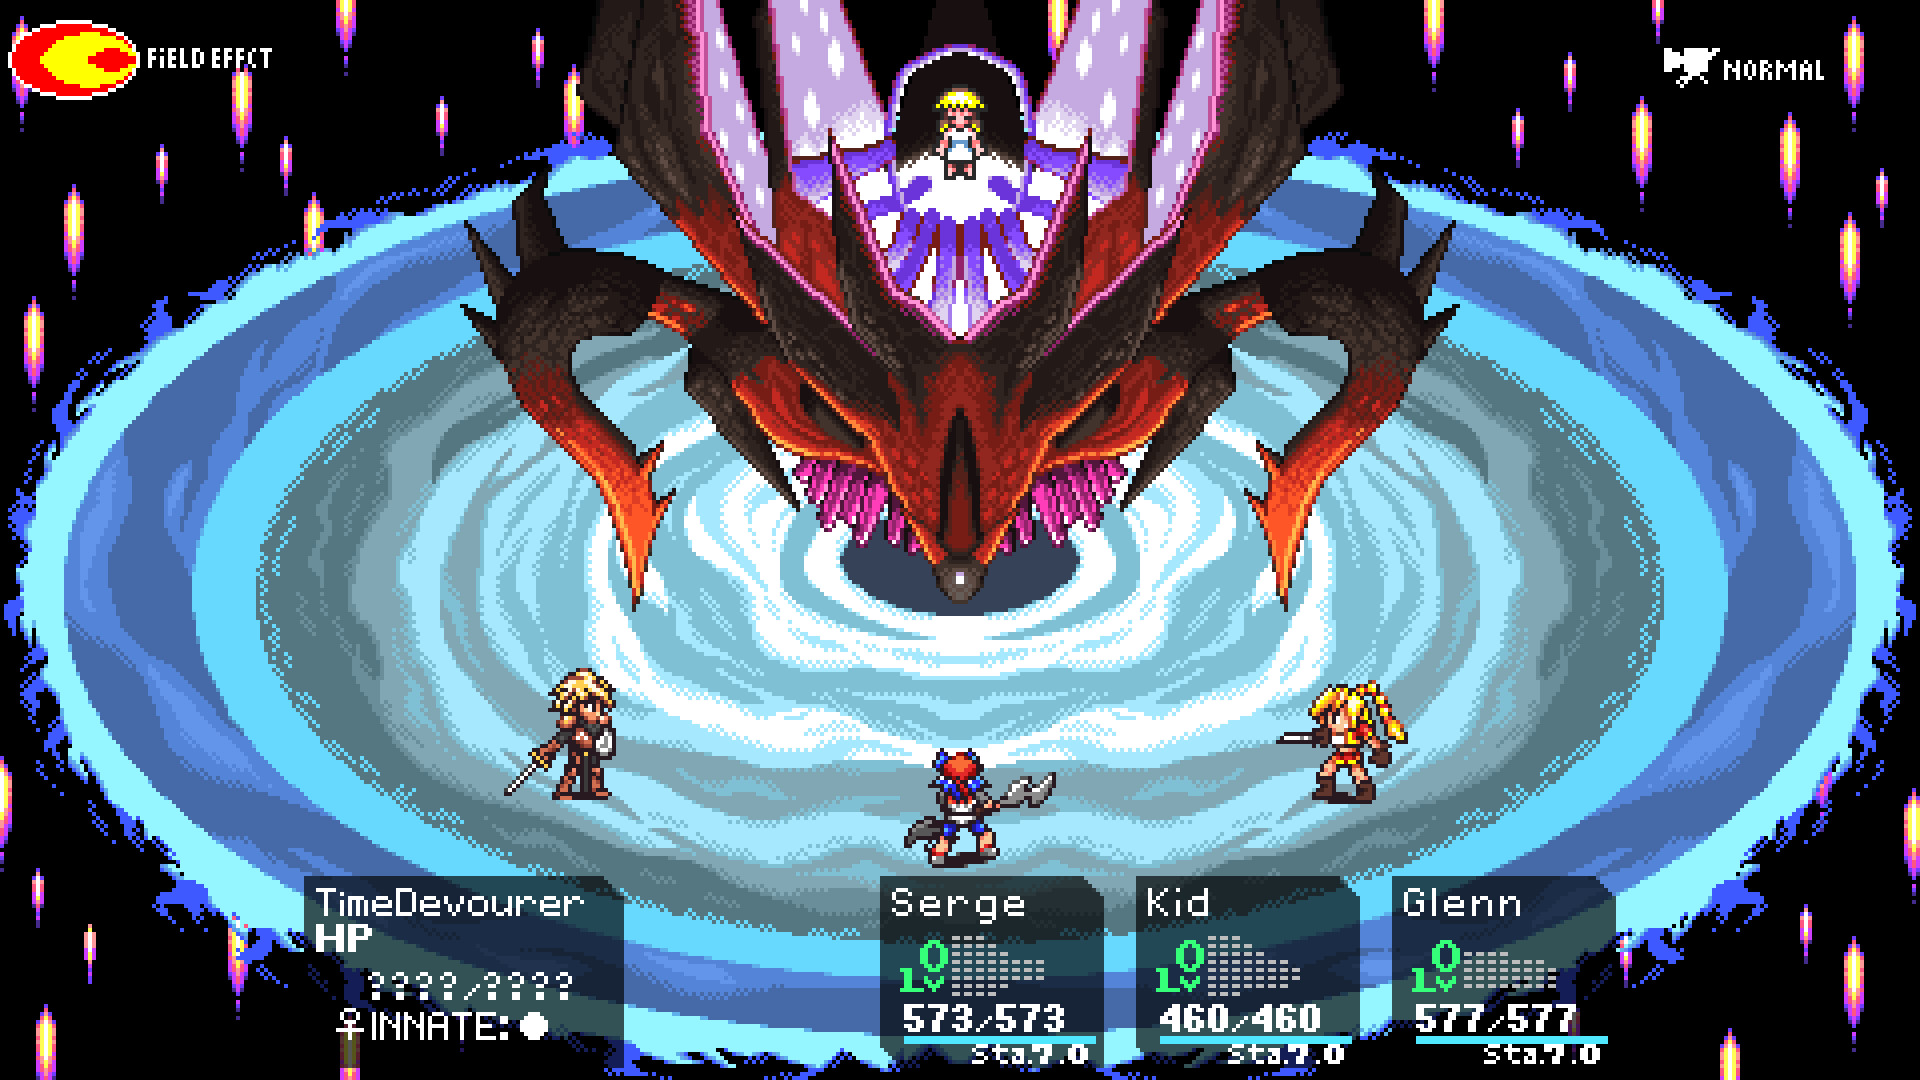 2560x1600, Desktop Wallpapers - End Of Time Chrono Trigger Phone , HD Wallpaper & Backgrounds